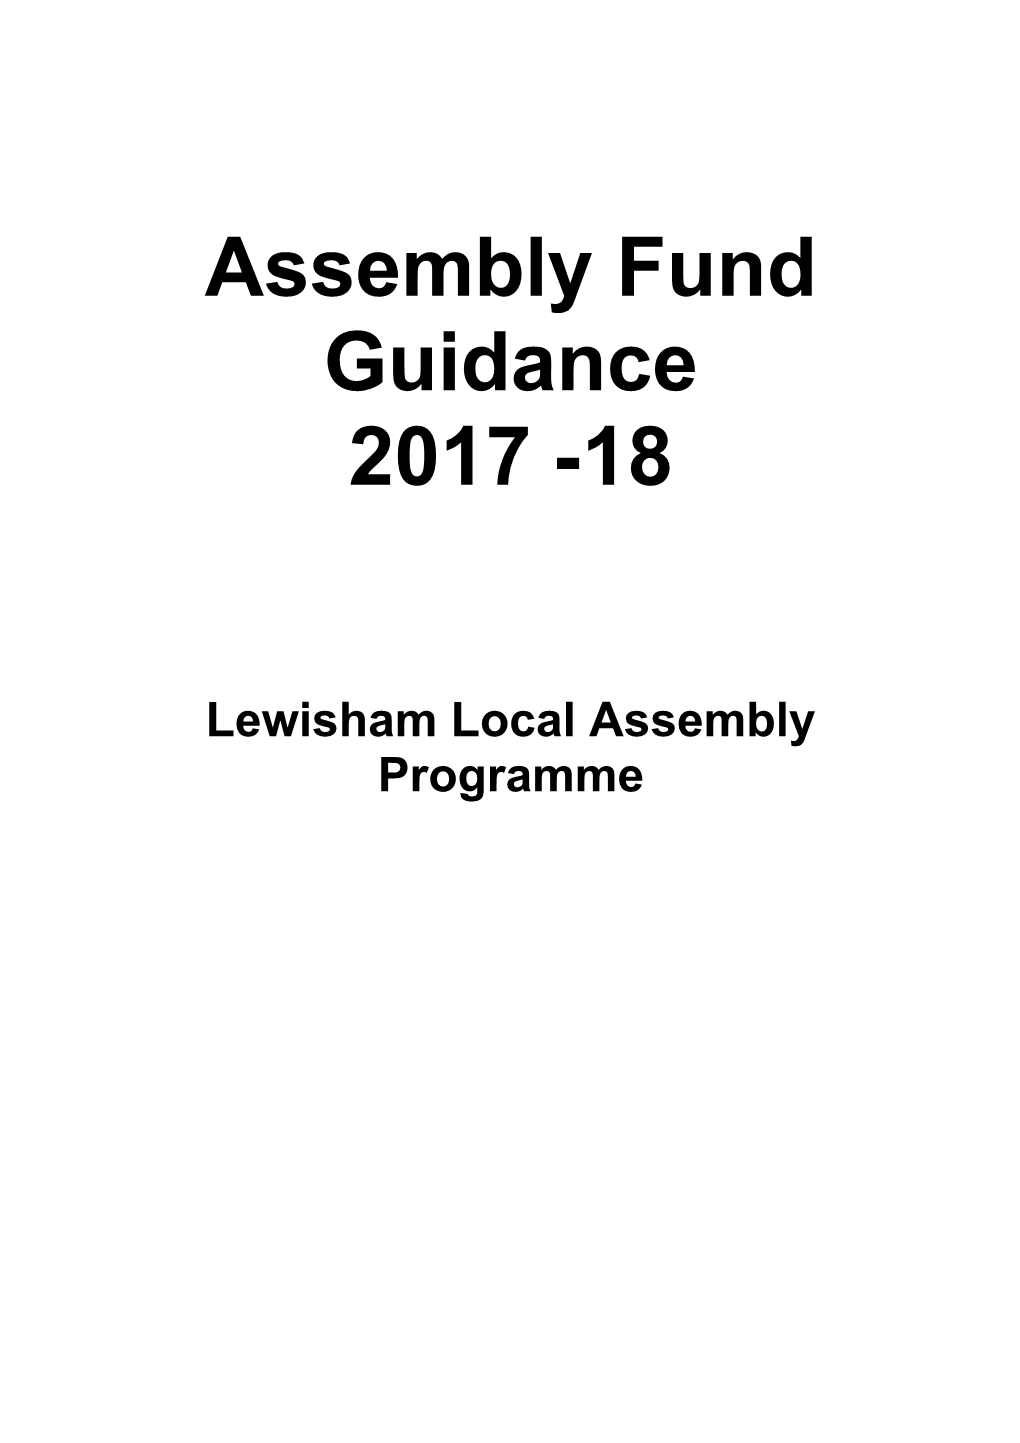 Telegraph Hill Assembly Fund Application Guidance